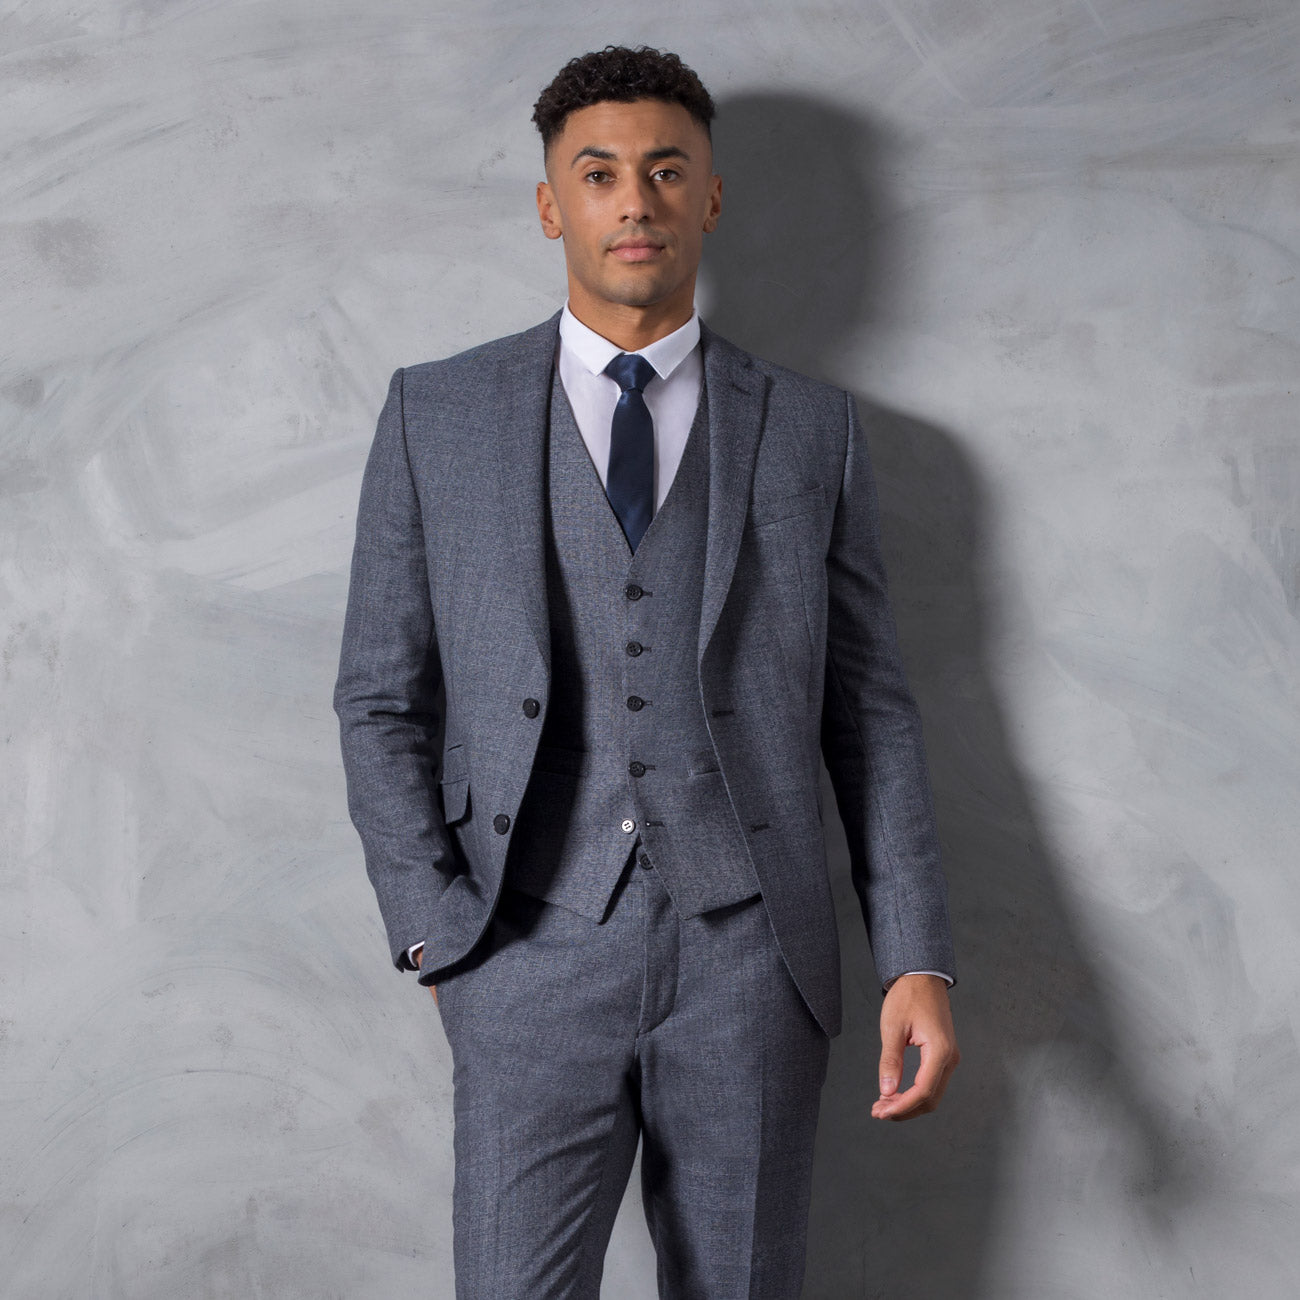 In its cool, calm and collected grey-blue, The Minster is unflappable, and quite literally so, when you factor in its modern and stylish slim-fit cut. The Prince of Wales check gives a subtly regal look to this three piece suit.